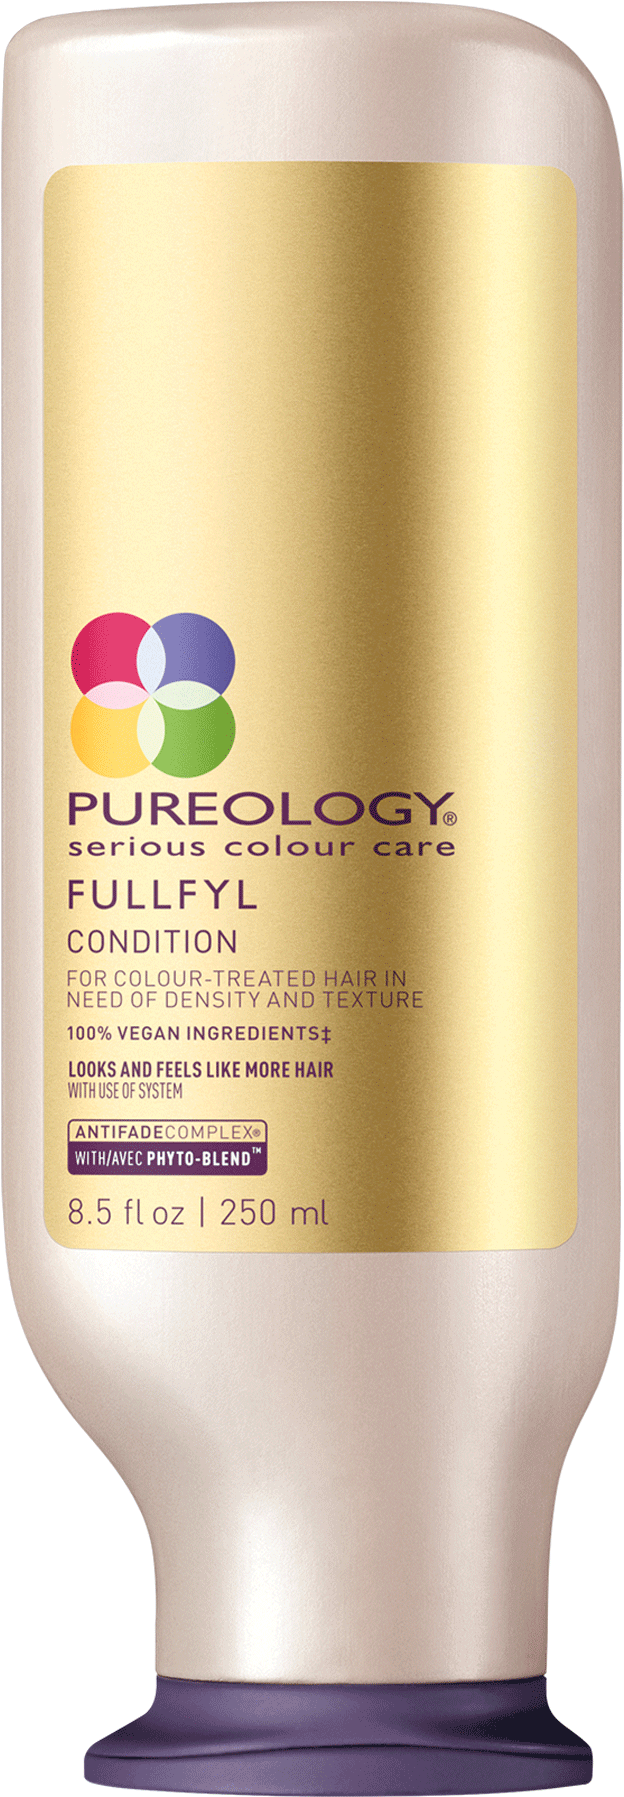 Fullfyl Hair Thickening Hair Conditioner - Pureology Conditioner (1536x1800), Png Download